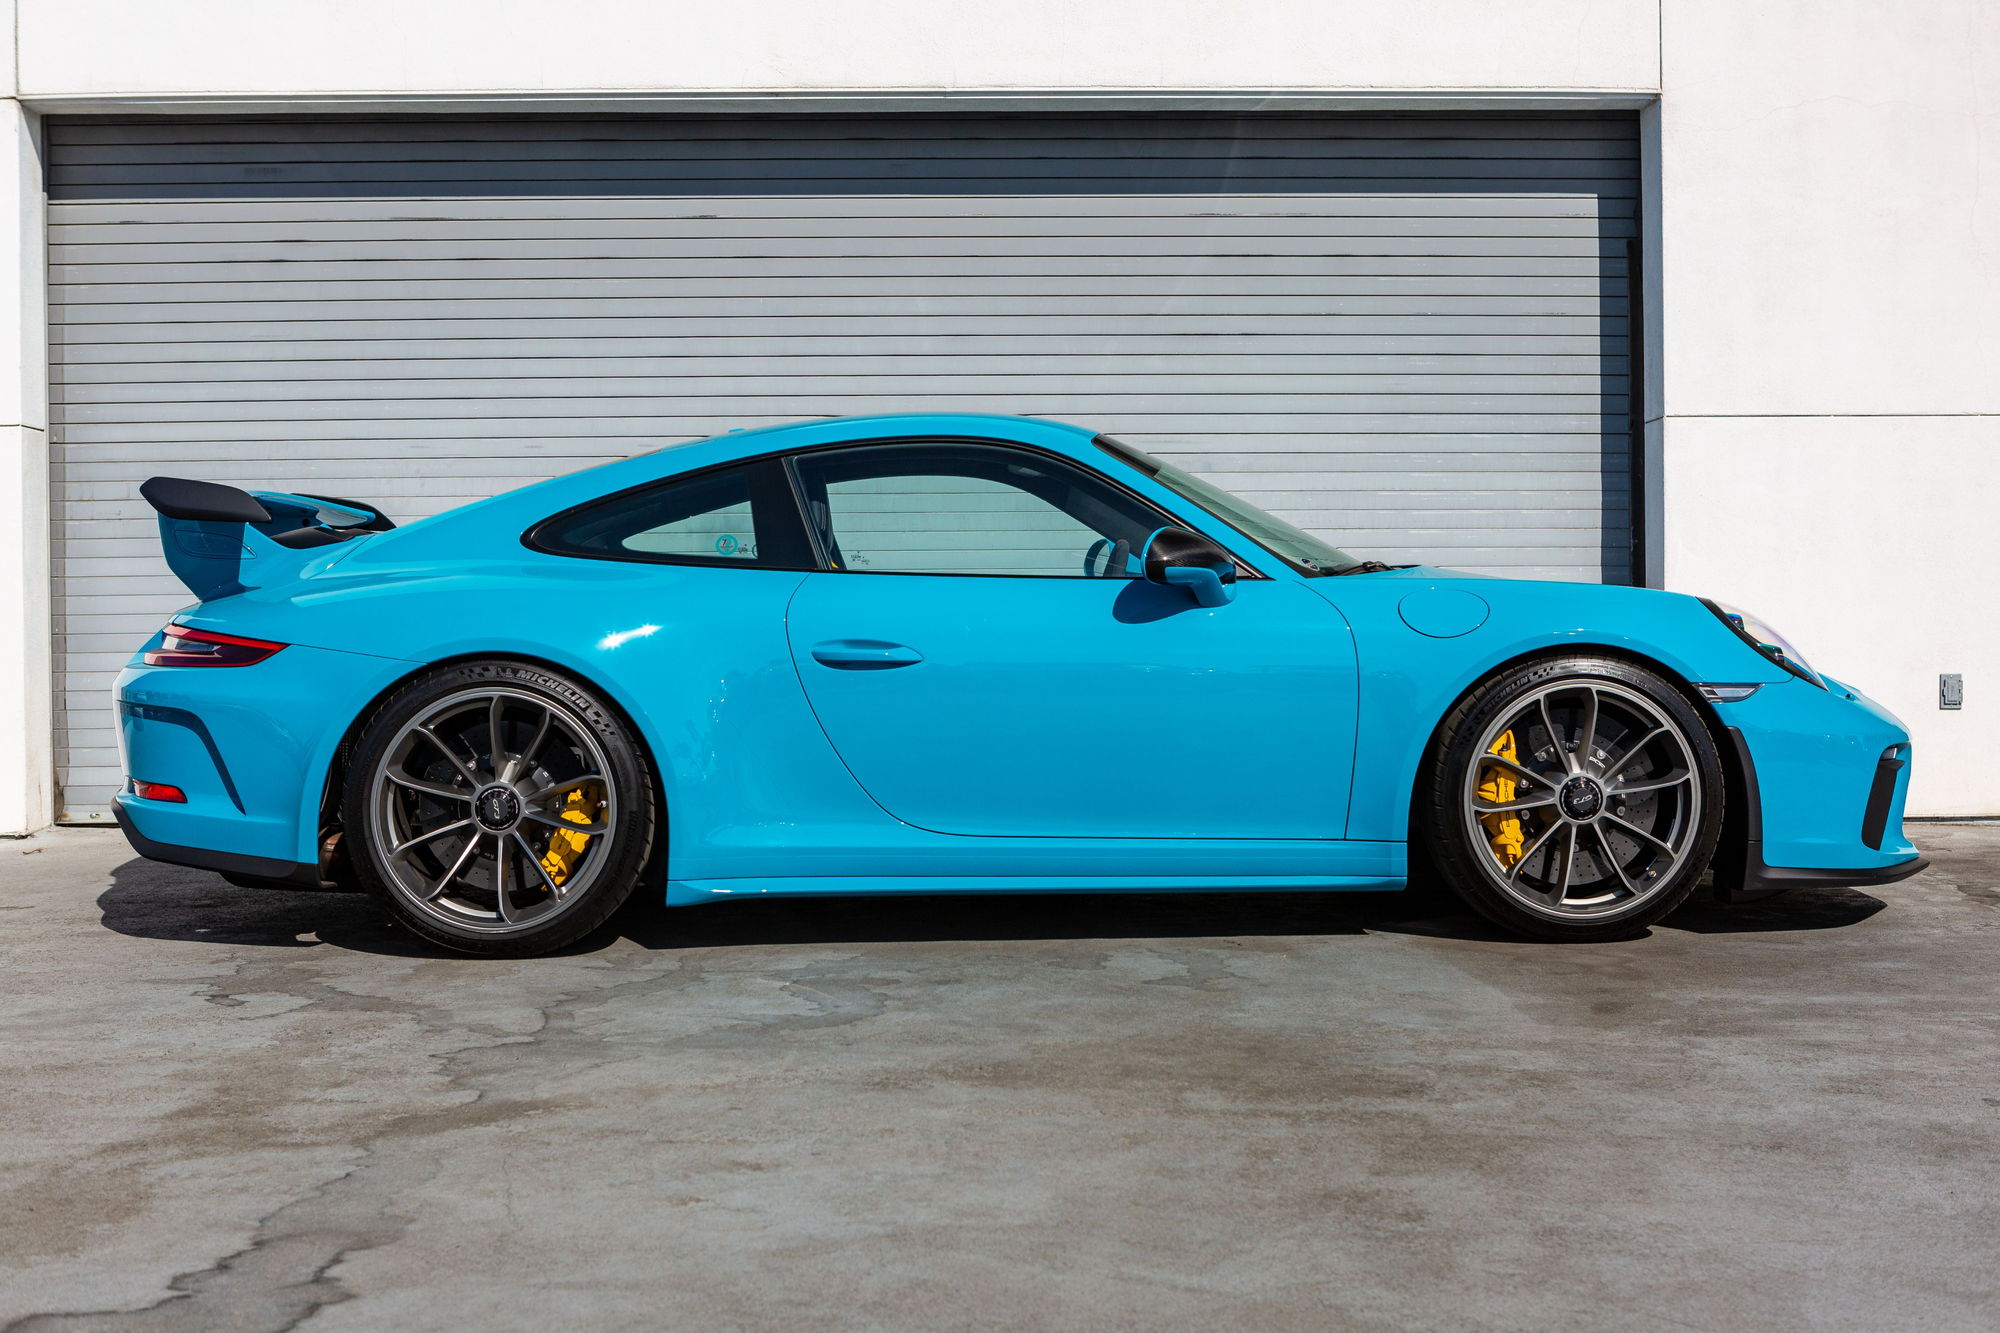 2018 Porsche GT3 - Miami Blue 991.2 GT3 w/ CPO - Used - VIN WP0AC2A99JS174630 - 2,315 Miles - 6 cyl - 2WD - Automatic - Coupe - Blue - Fresno, CA 93650, United States